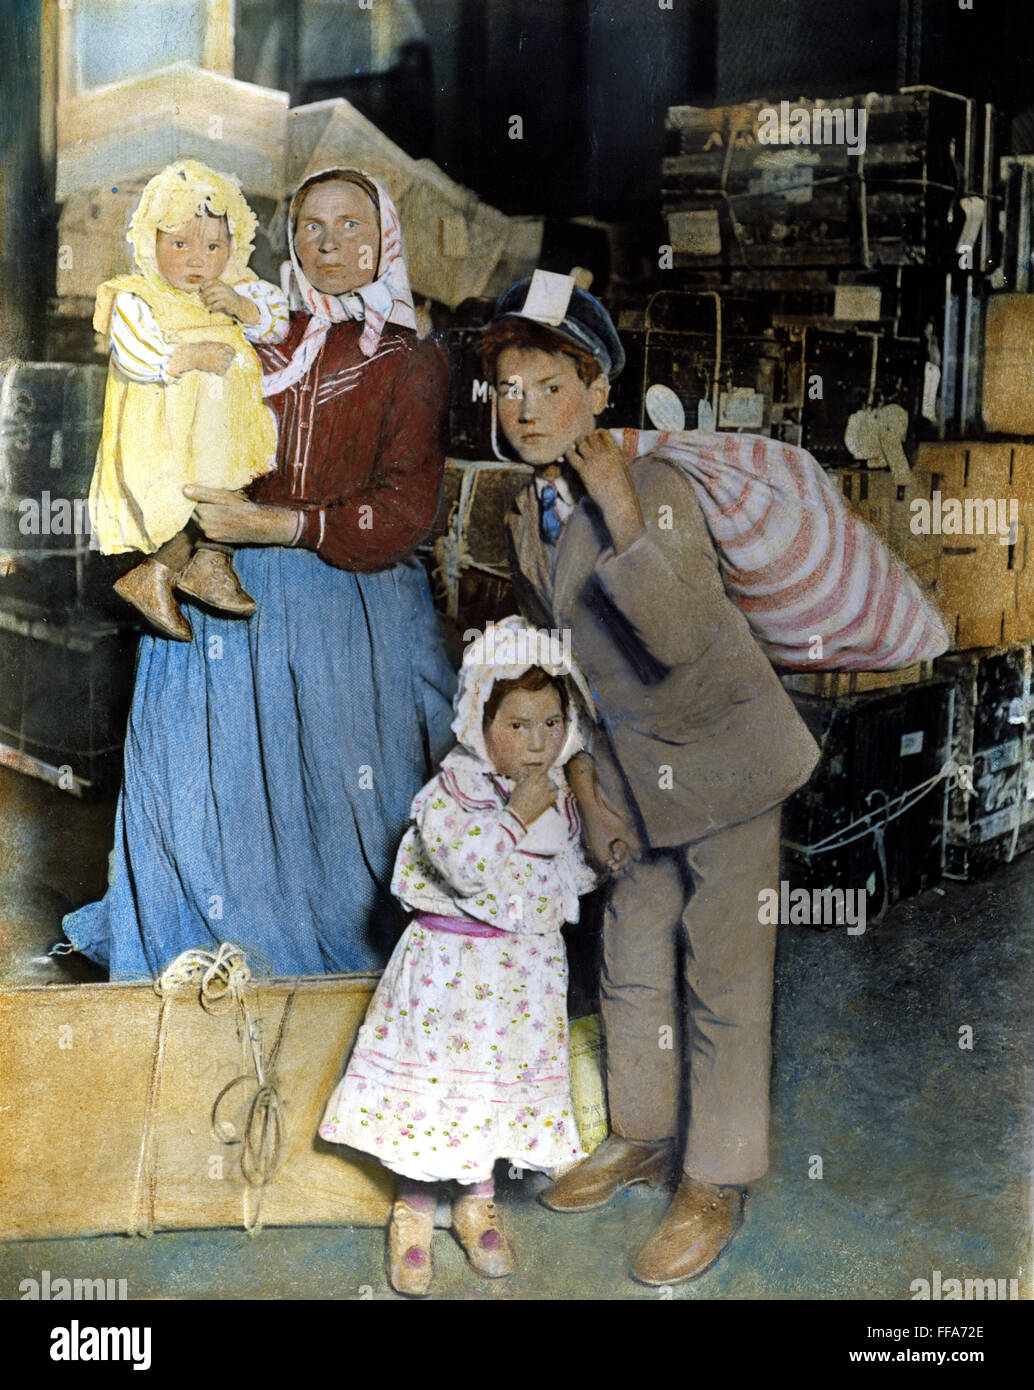 AN IMMIGRANT FAMILY /nat Ellis Island, c. 1905. Oil over a photograph. Stock Photo